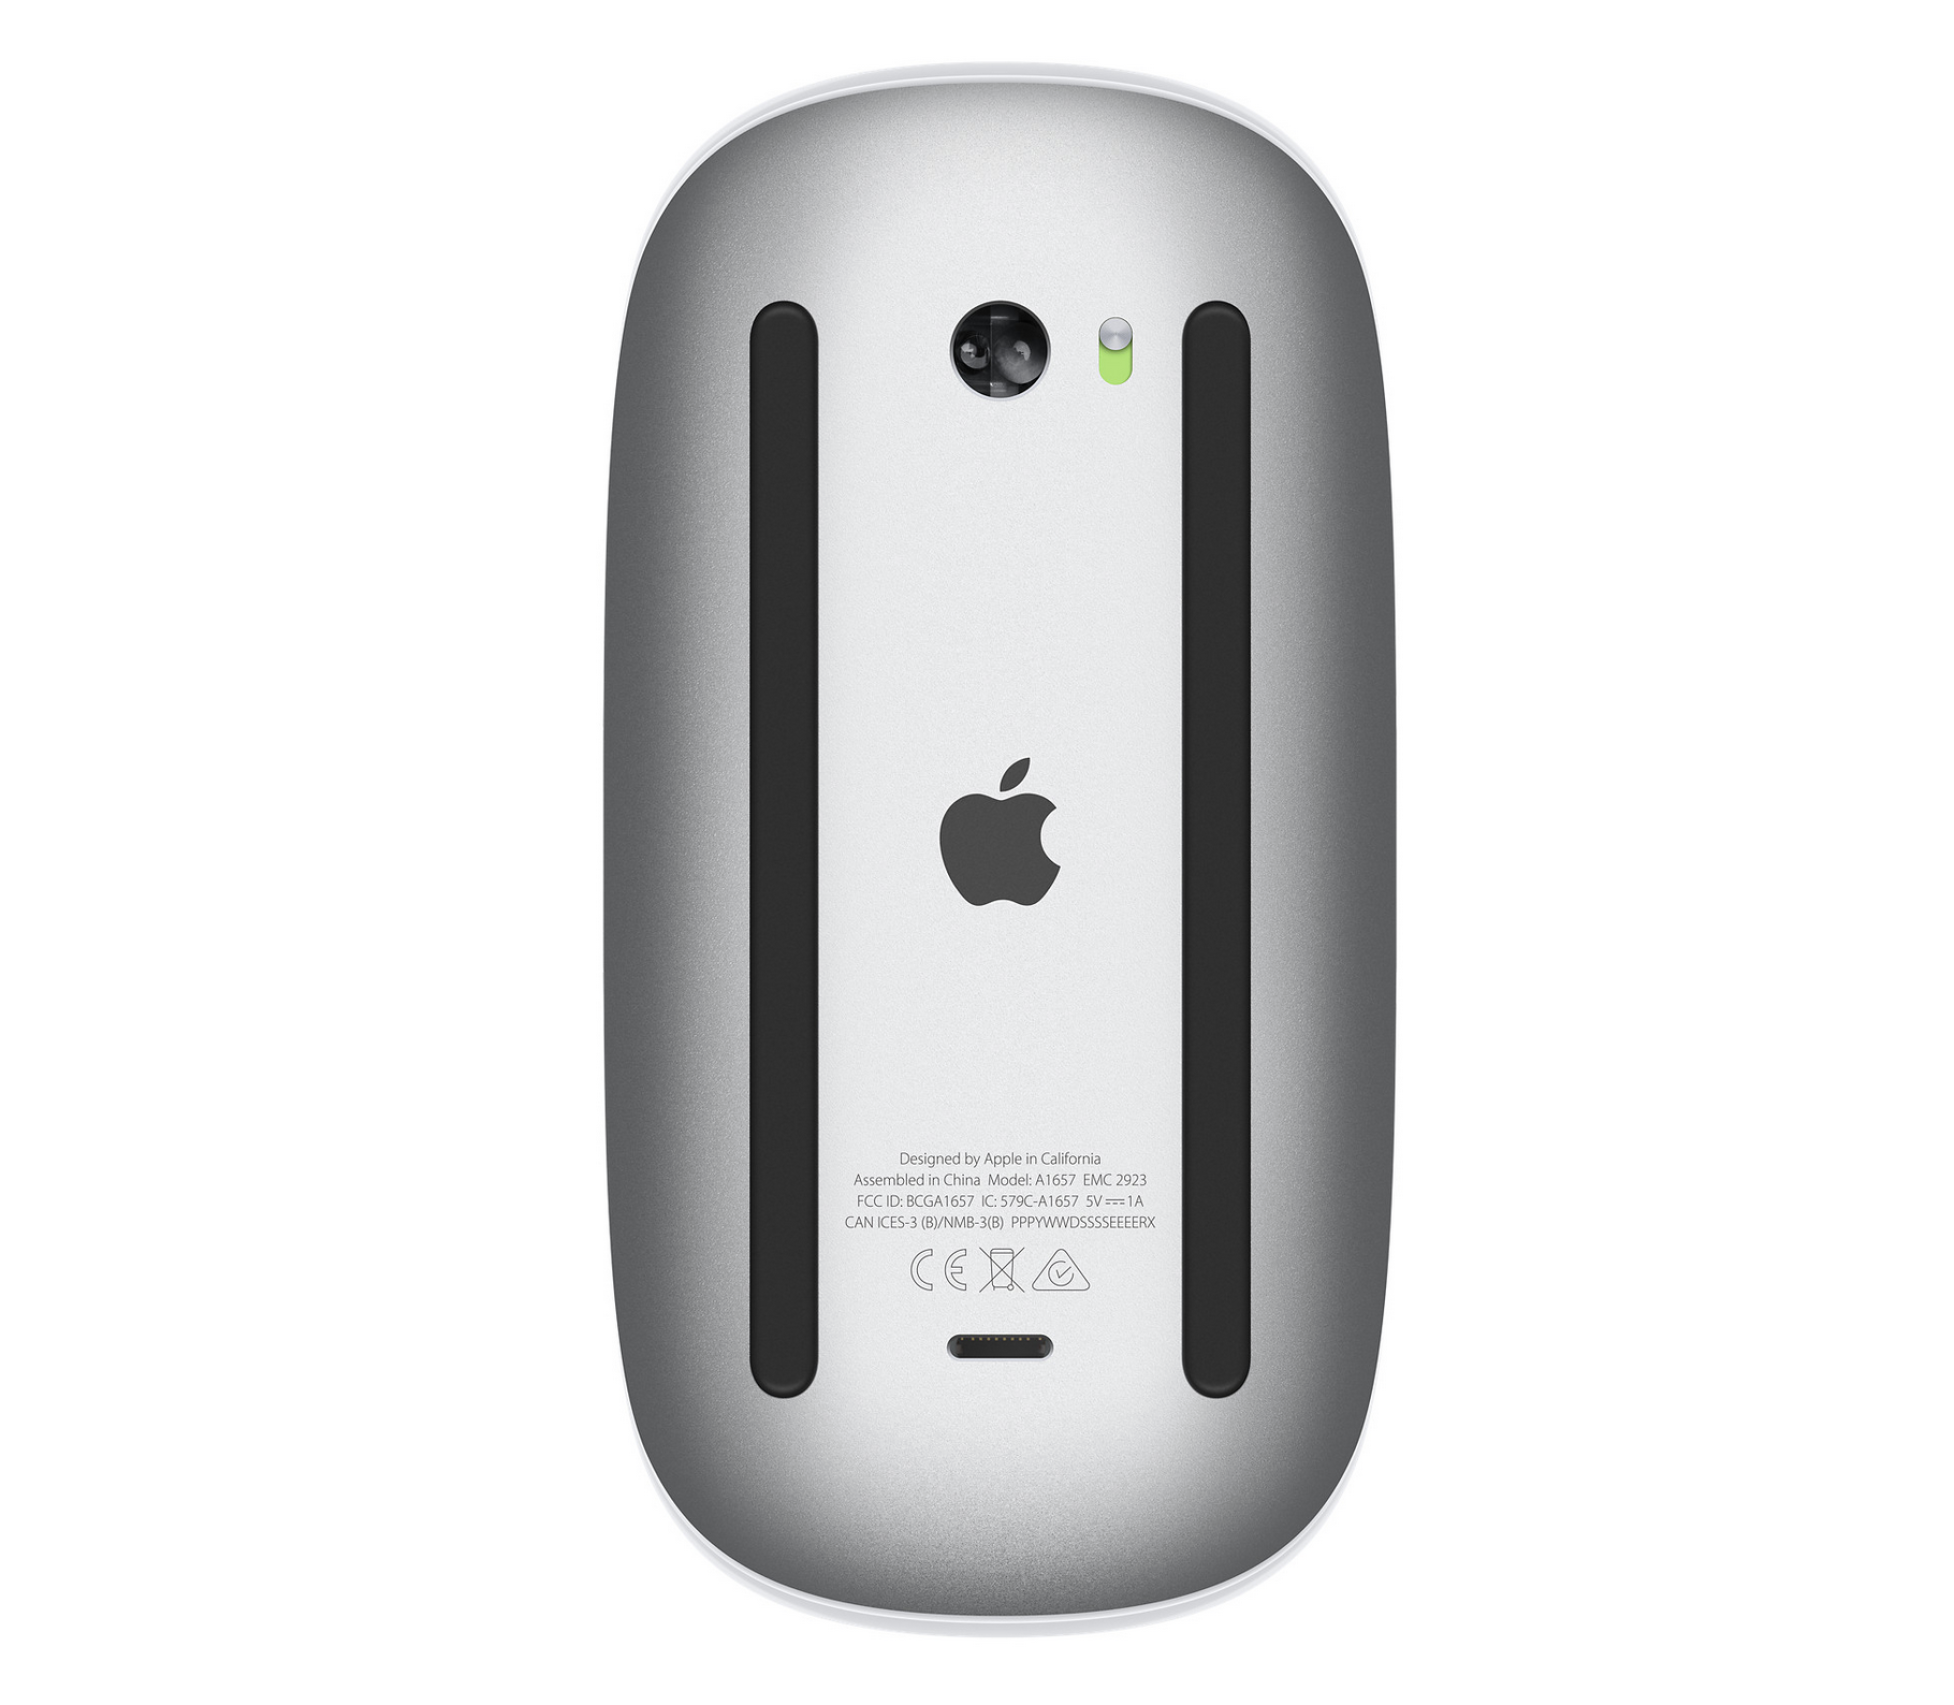 Apple Magic Mouse Beidhändig Bluetooth Multi-Touch weiss